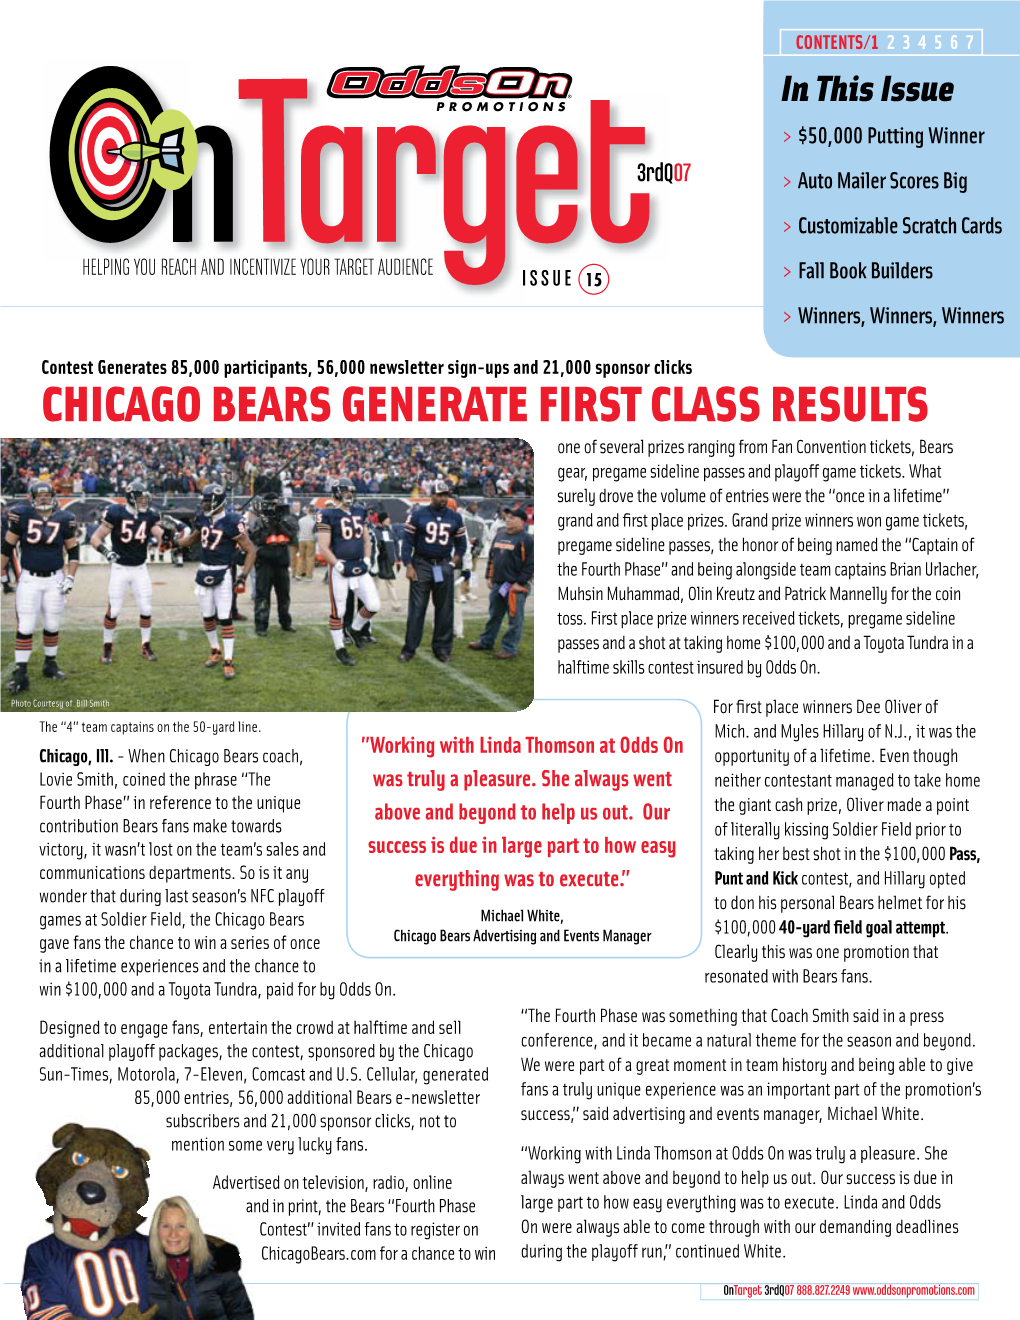 CHICAGO BEARS GENERATE FIRST CLASS RESULTS One of Several Prizes Ranging from Fan Convention Tickets, Bears Gear, Pregame Sideline Passes and Playoff Game Tickets